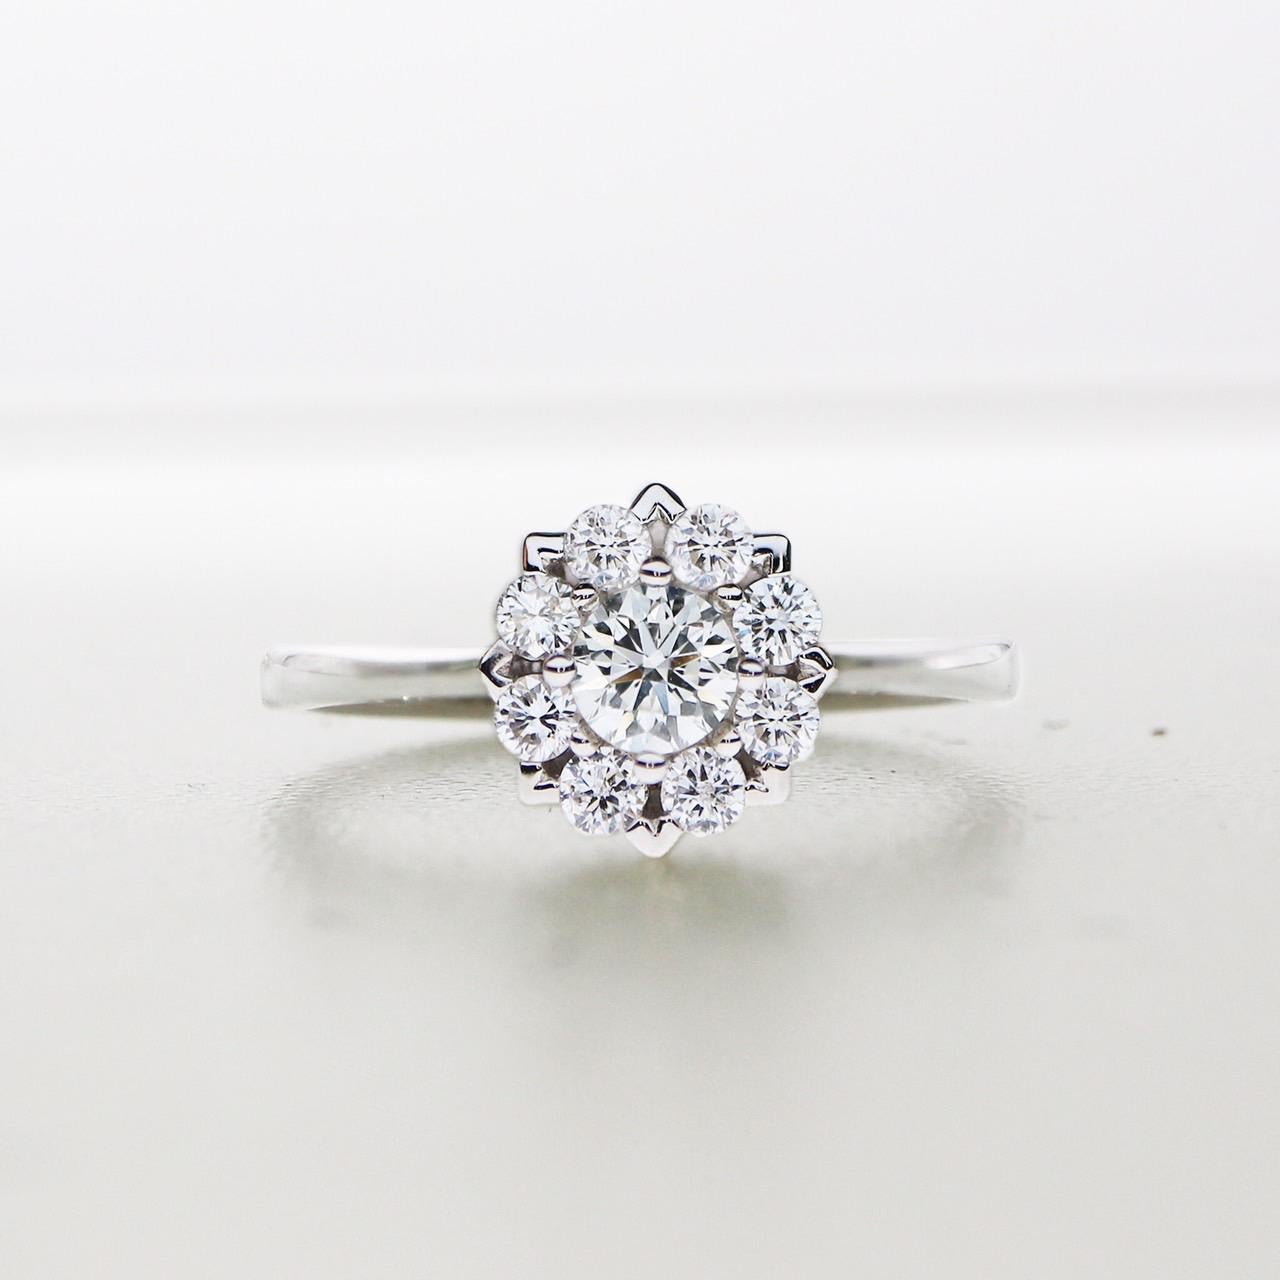 *GIA H VS2 0.23 Ct Flower Shape Diamond Engagement Ring*
GIA-Certified H VS2 diamond as the center stone weighing 0.23 ct set with 8 pieces of FG VS round brilliant diamonds weighing 0.20 ct on the 14K white gold band. 

The classic flower shape